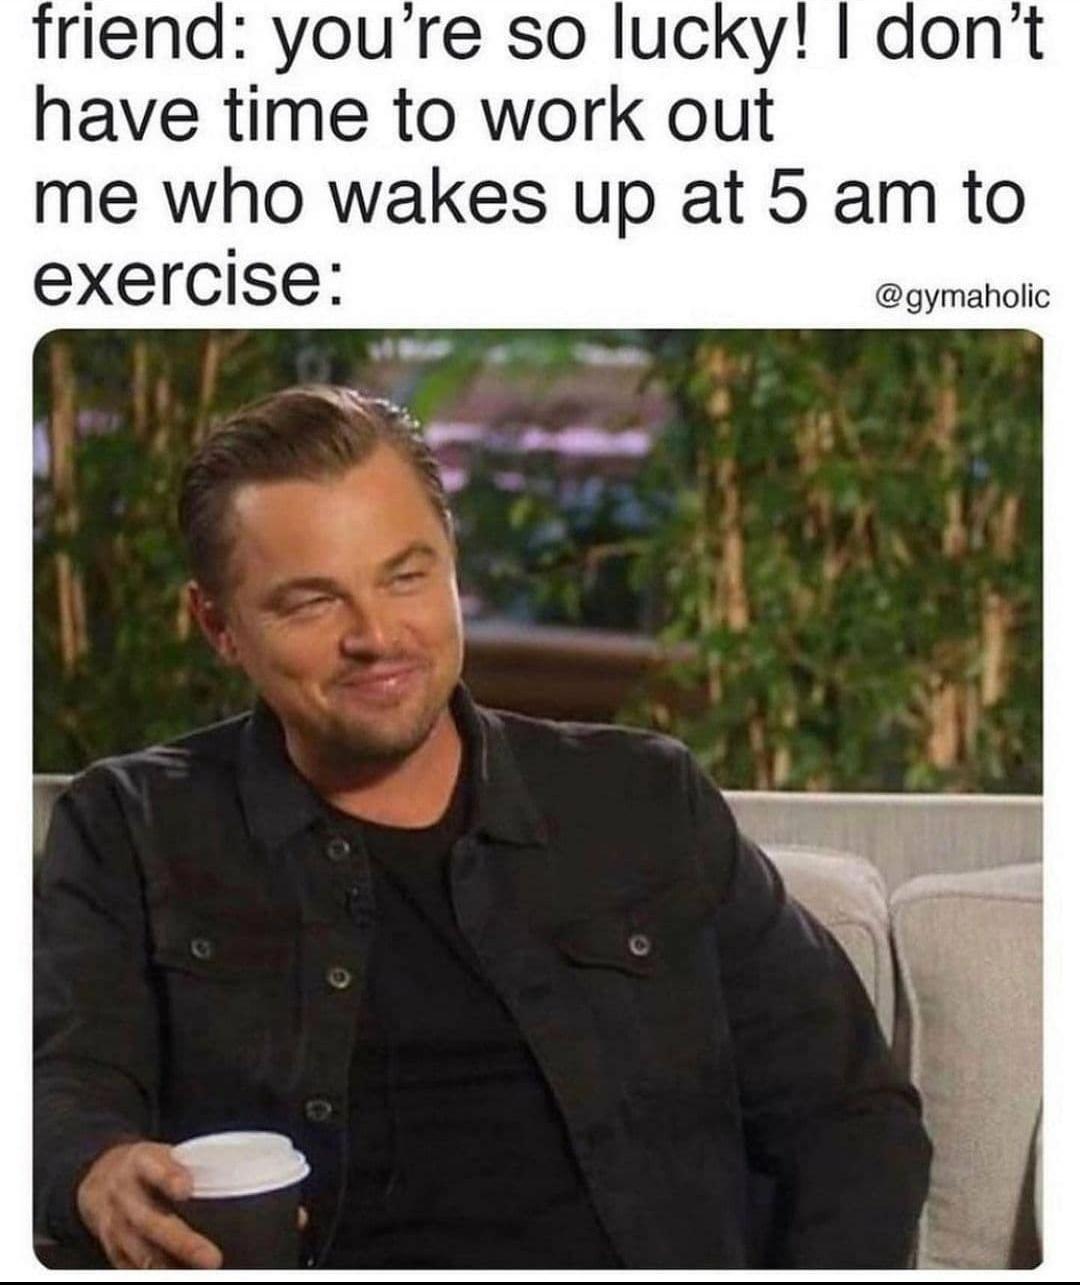 funny memes - funny pictures - weekend vibes meme - friend you're so lucky! I don't have time to work out me who wakes up at 5 am to exercise